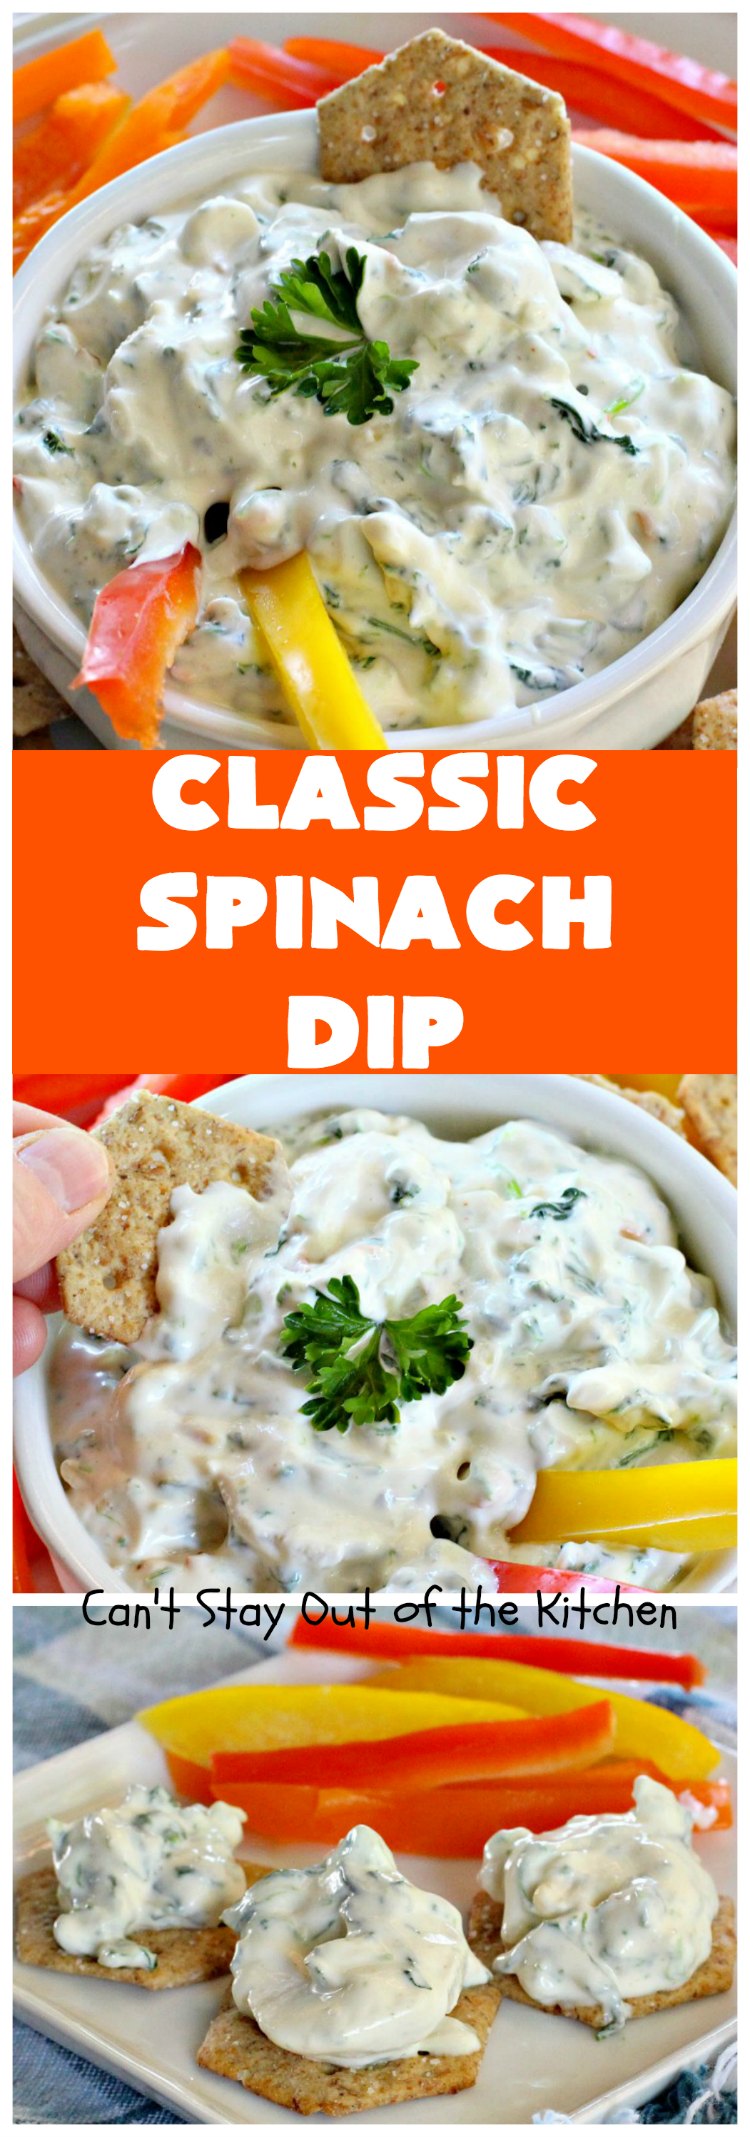 Classic Spinach Dip | Can't Stay Out of the Kitchen